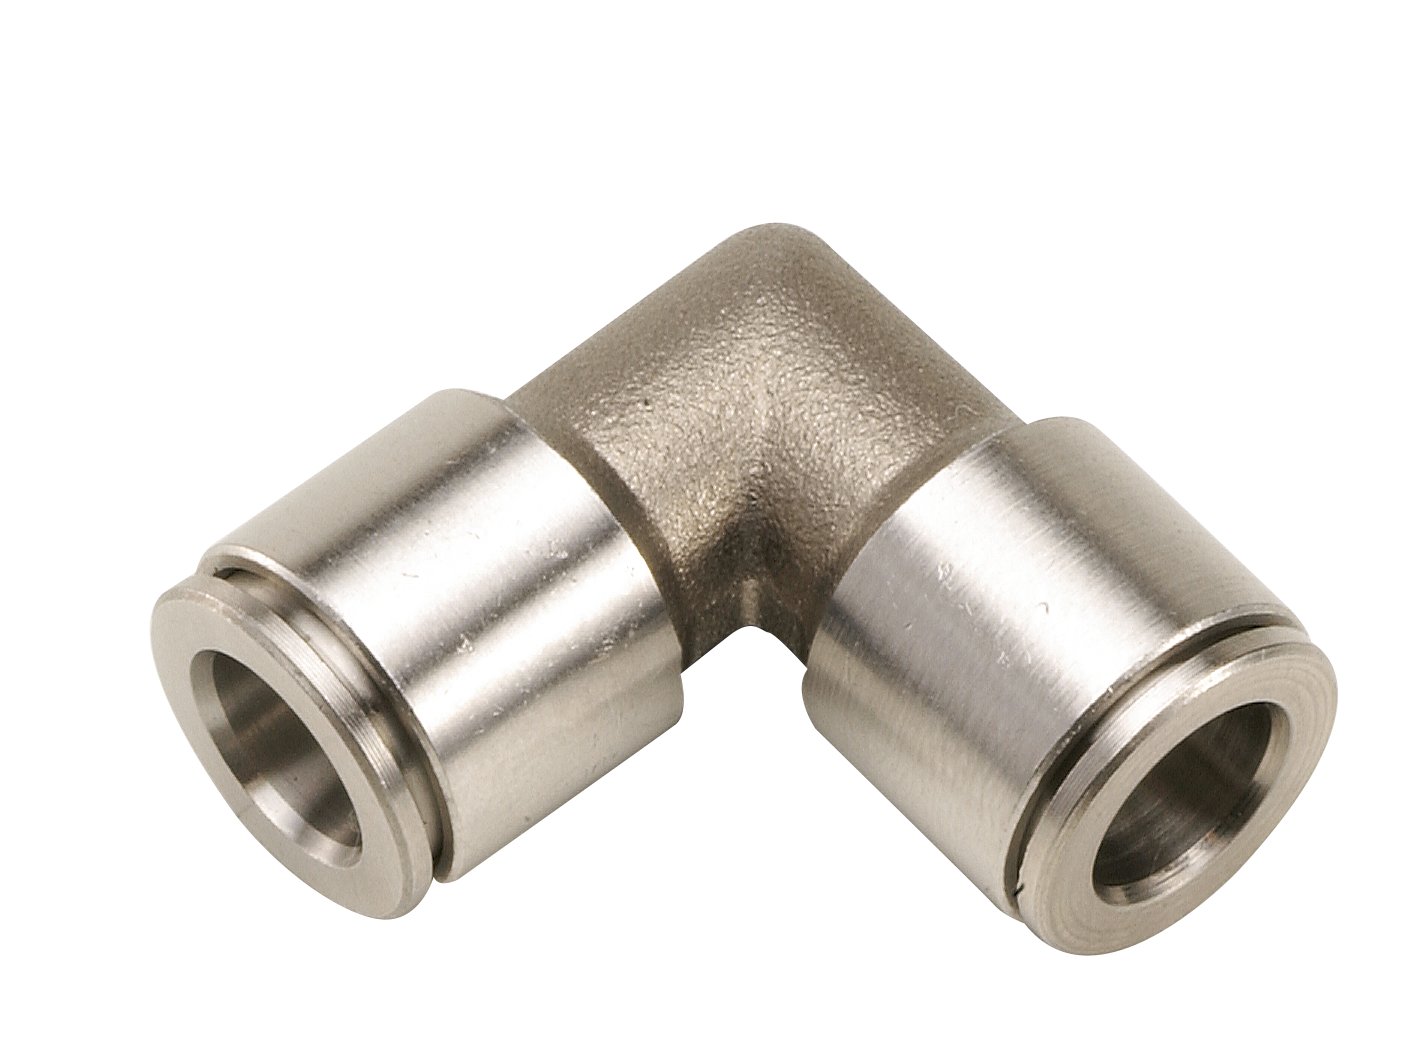 Junction’s fittings INTERMEDIATE ELBOW FITTING Fittings and quick-connect couplings